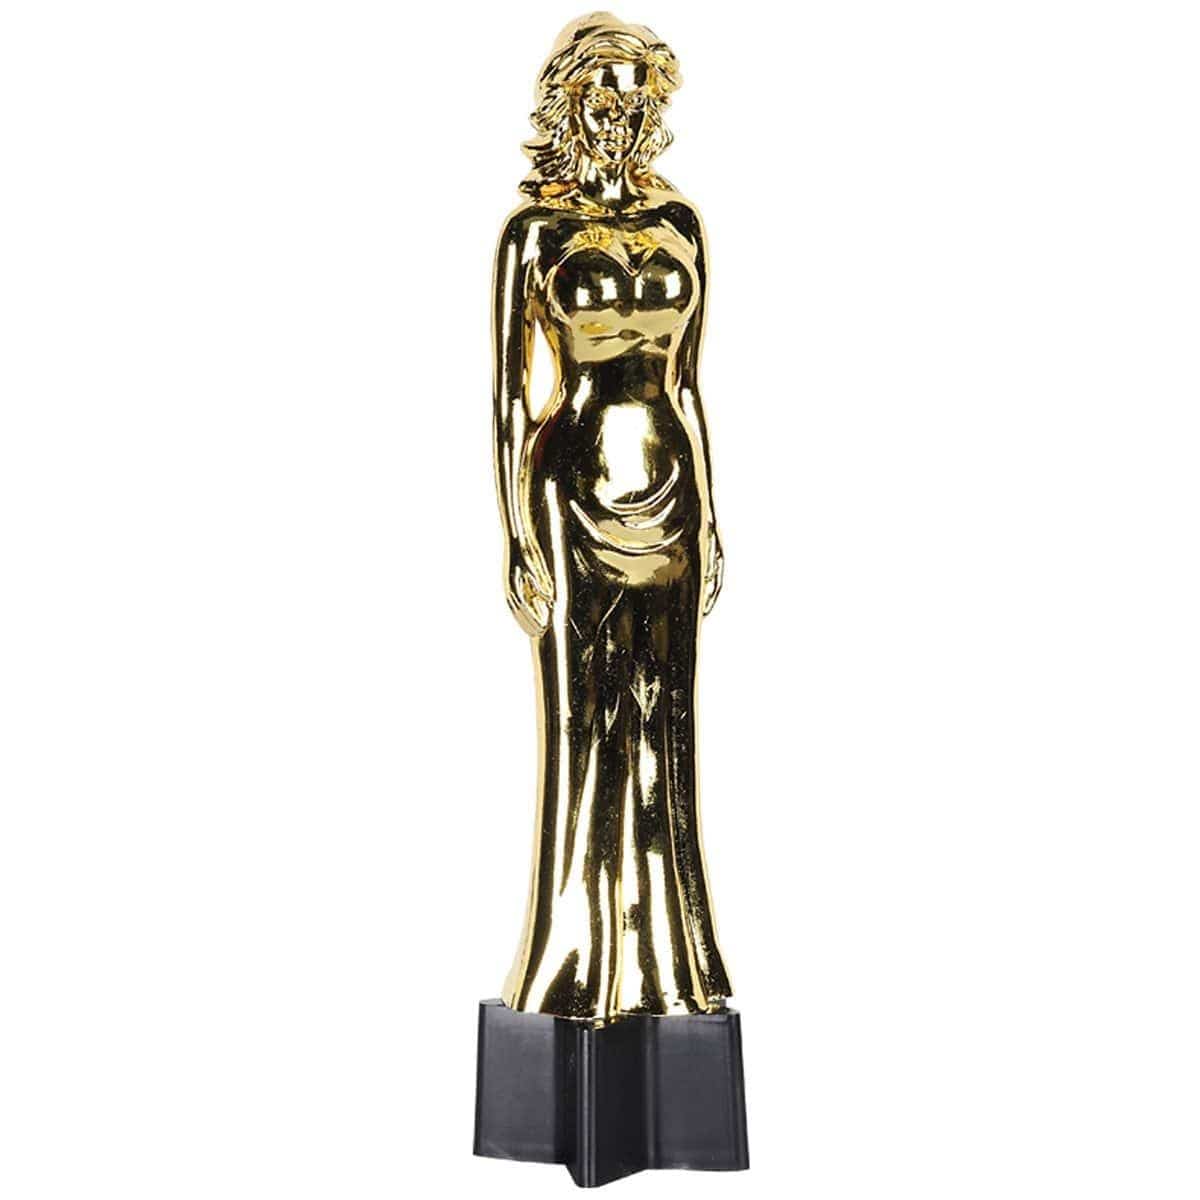 Buy Theme Party Female Award Trophy, 9 Inches sold at Party Expert